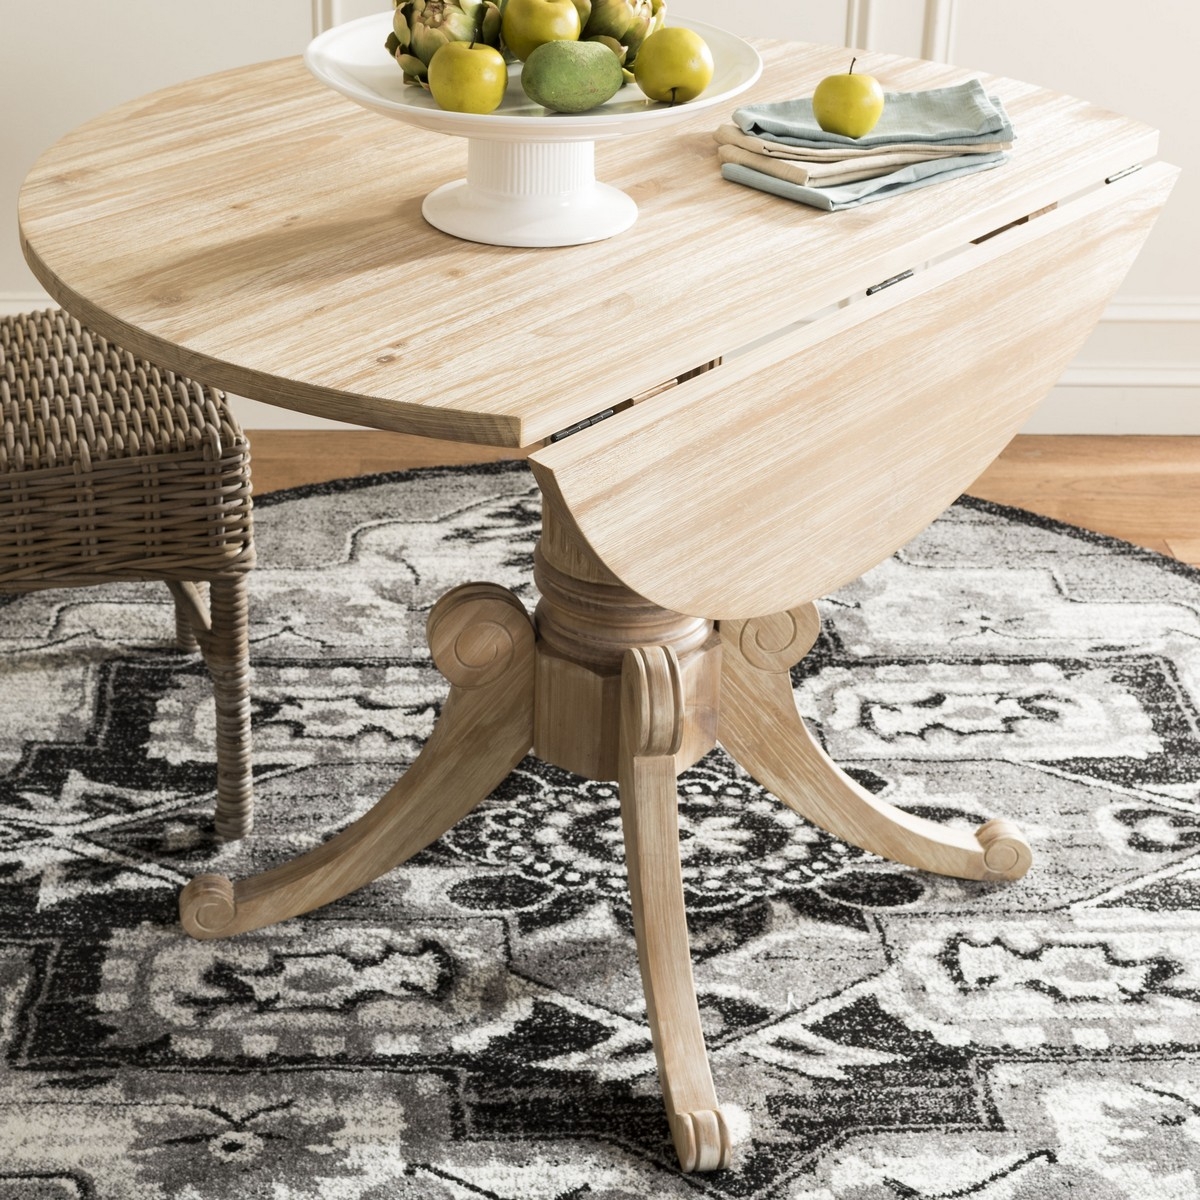 Forest Drop Leaf Dining Table - Rustic Natural - Arlo Home - Image 3